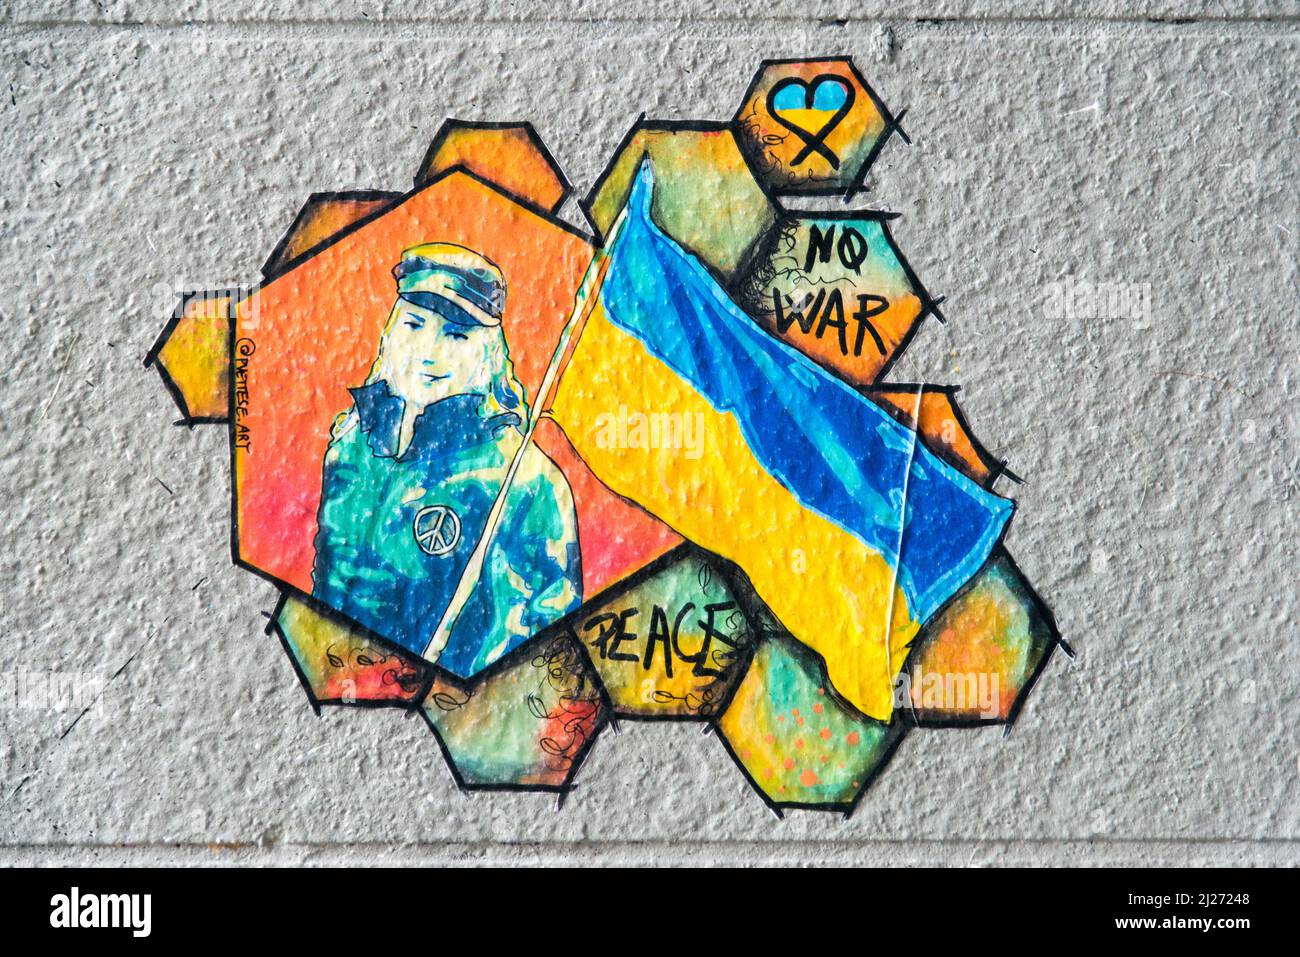 Street artists call for peace in Ukraine. This weekend, Spot13 and the Lavomatik (20 Bd du Général Jean Simon, 75013 Paris) invited stencil artists and gluers to come and post messages of peace and love on the walls. Paris, France, on March 30, 2022. Photo by Denis Prezat/ABACAPRESS.COM Stock Photo